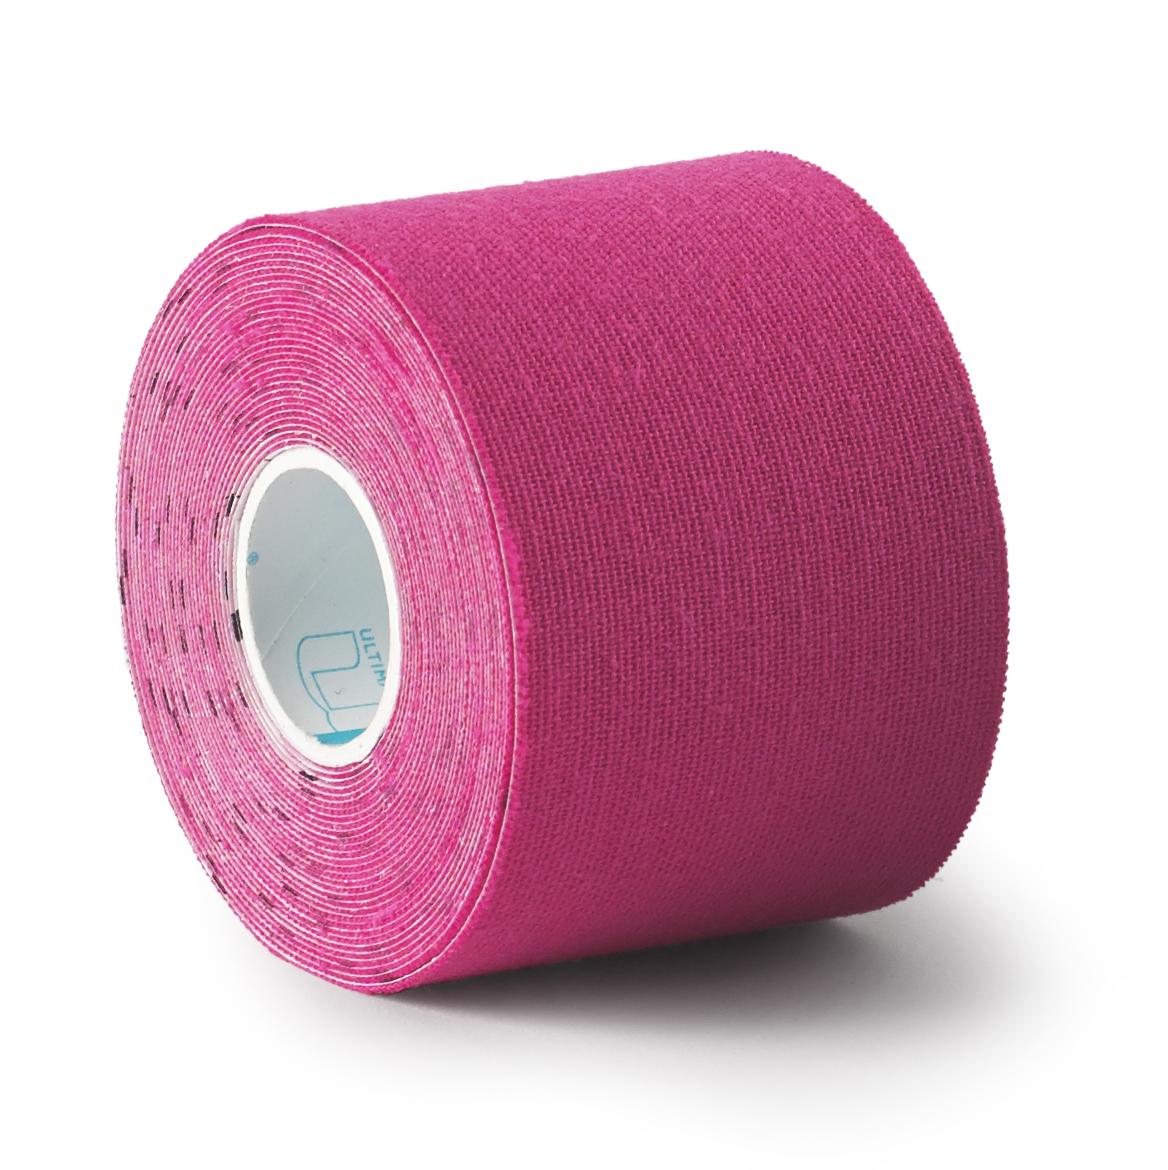 Ultimate Performance Kinesiology Tape - Pink